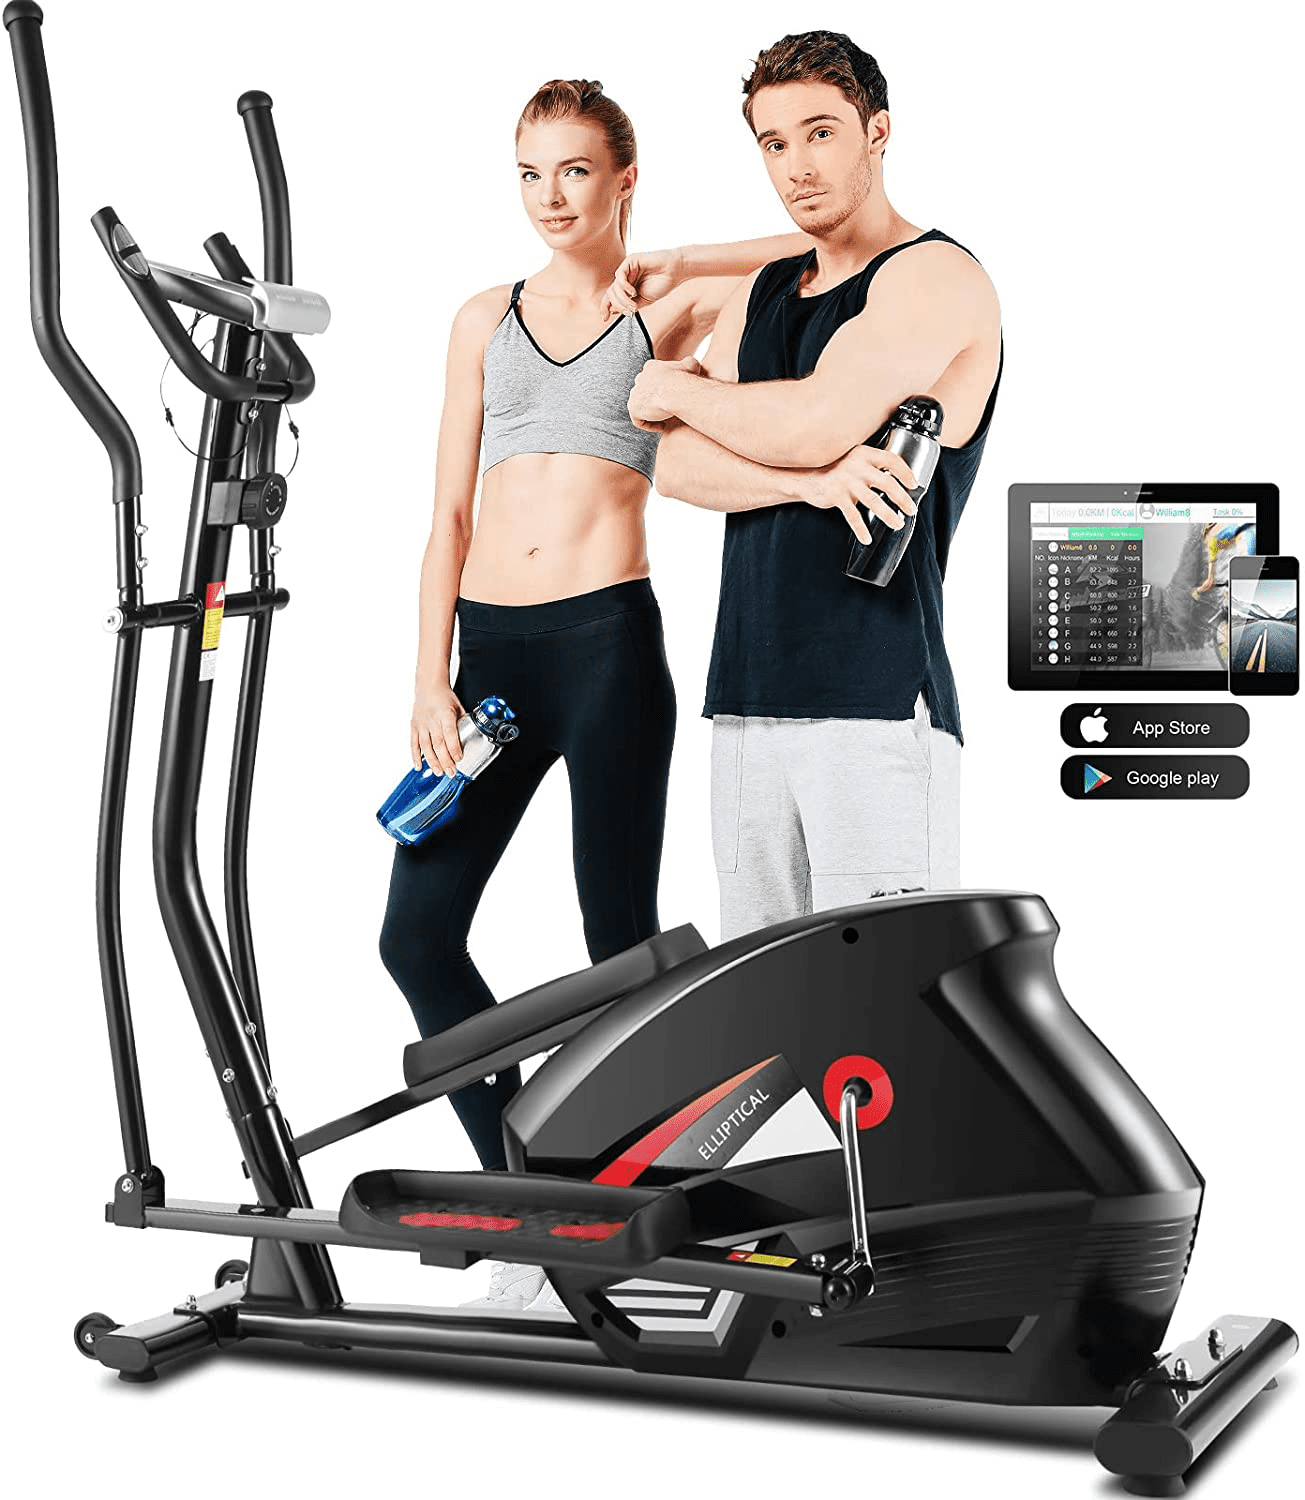 Ancheer Elliptical Exercise Workout Machine pedal Trainer Bike In-house Delivery 